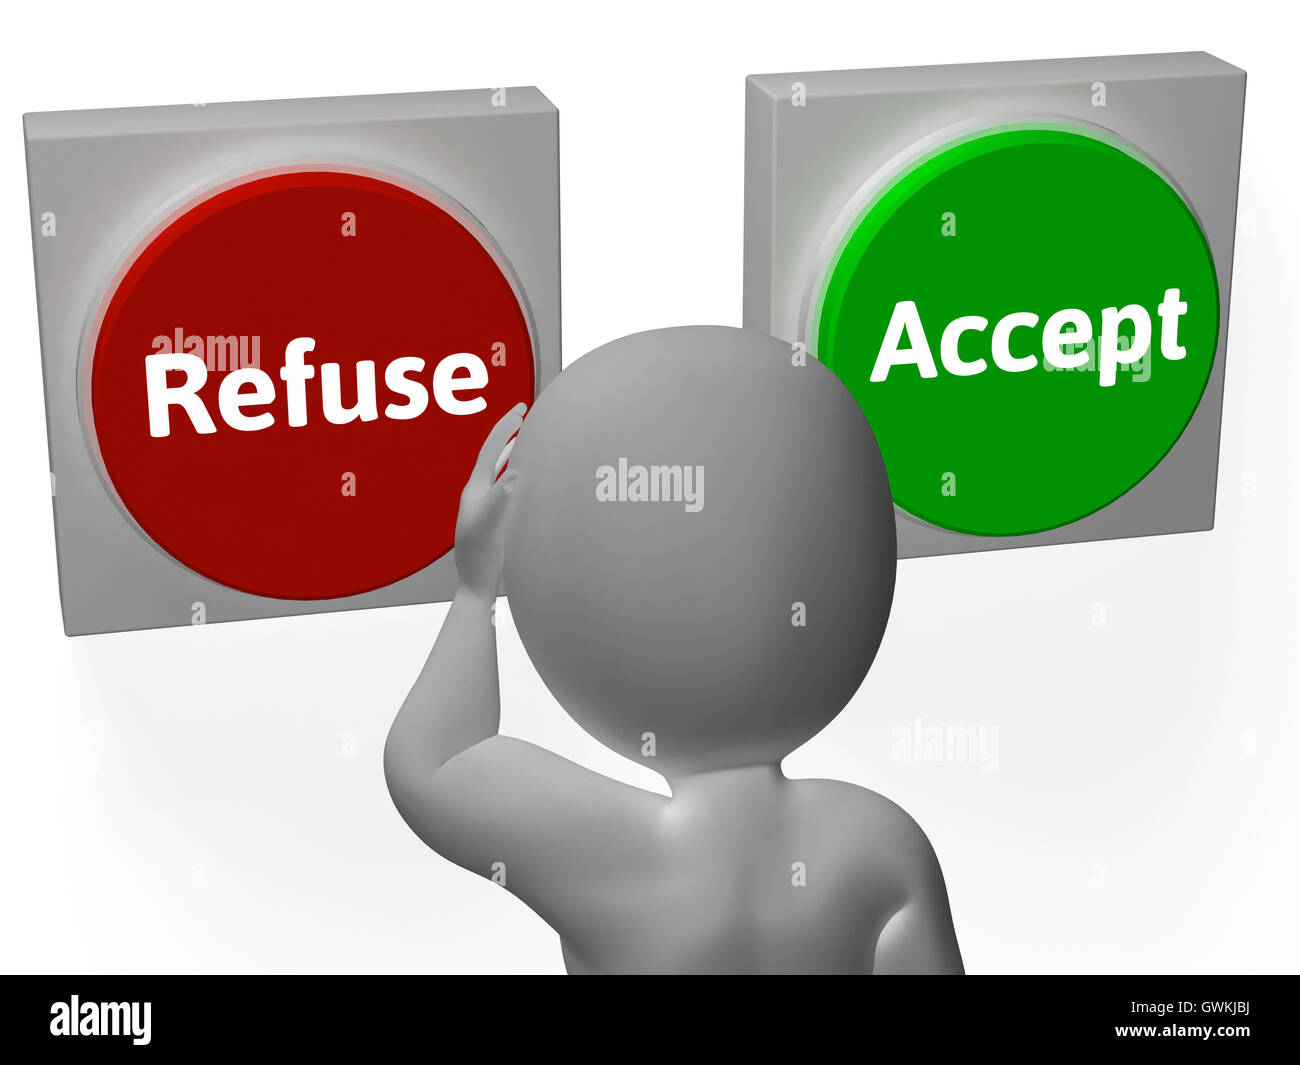 Refuse Accept Buttons Shows Refusal Or Acceptance Stock Photo